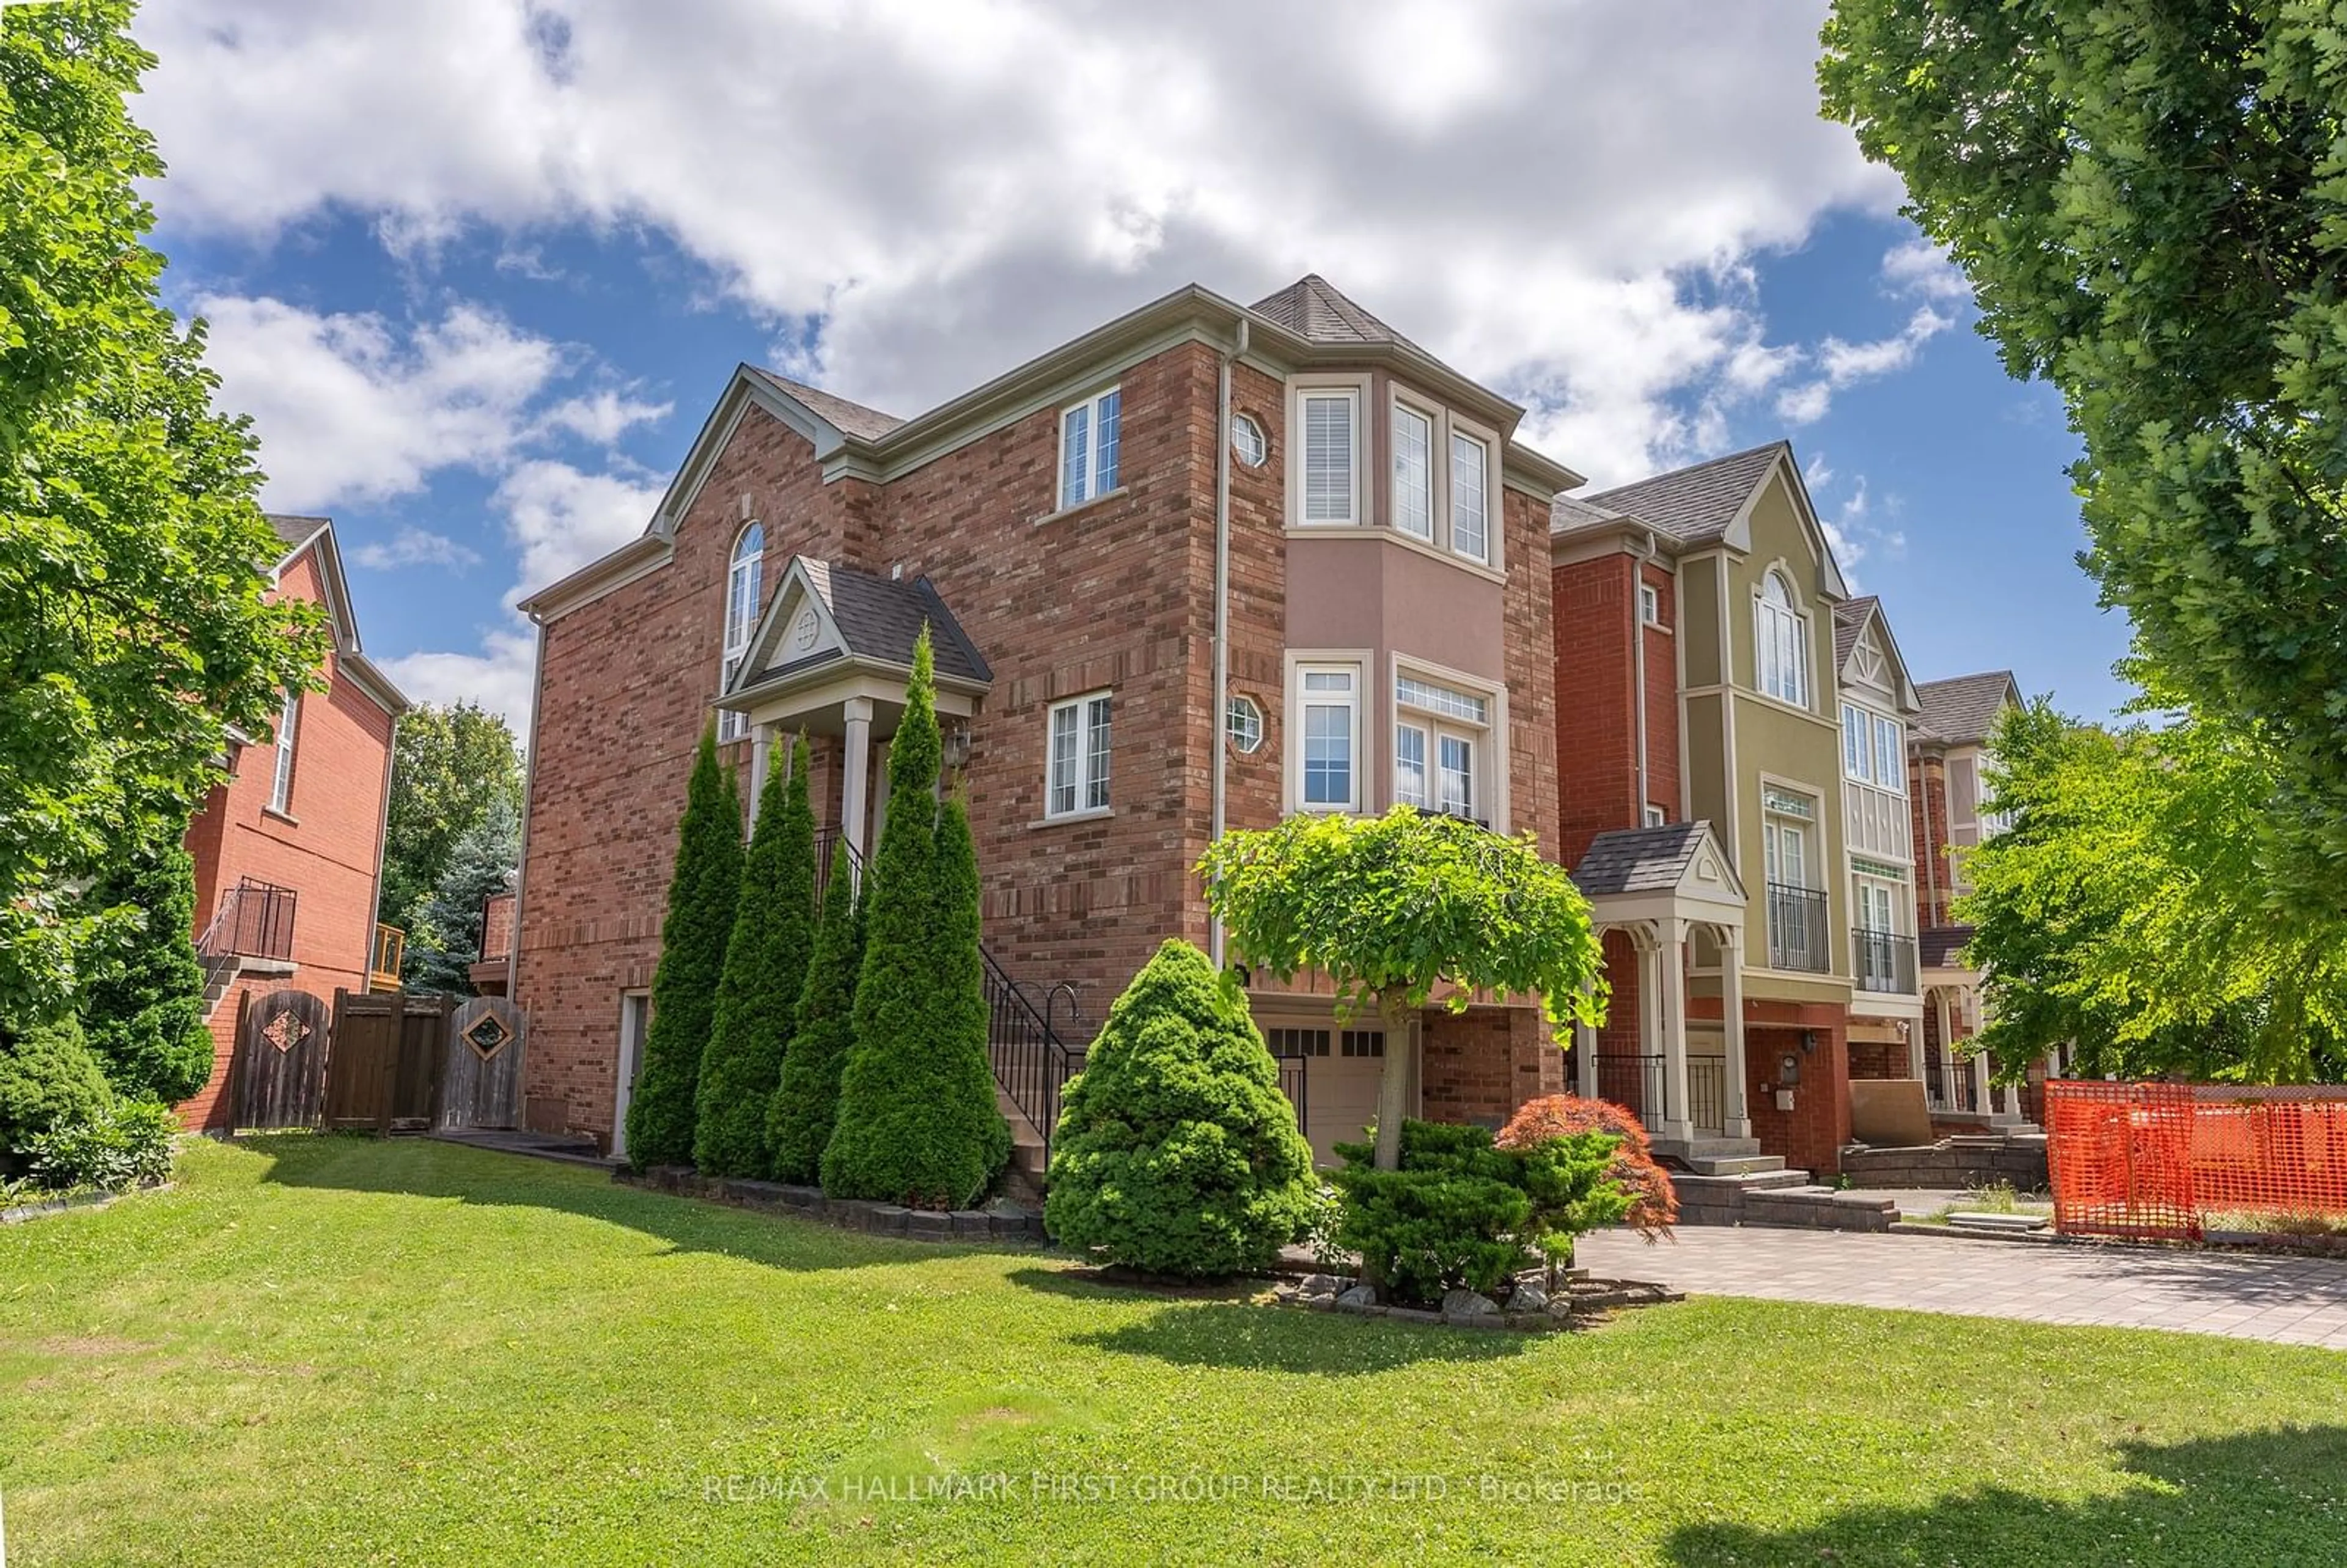 Home with brick exterior material for 25 Crispin Crt, Markham Ontario L3R 4G6